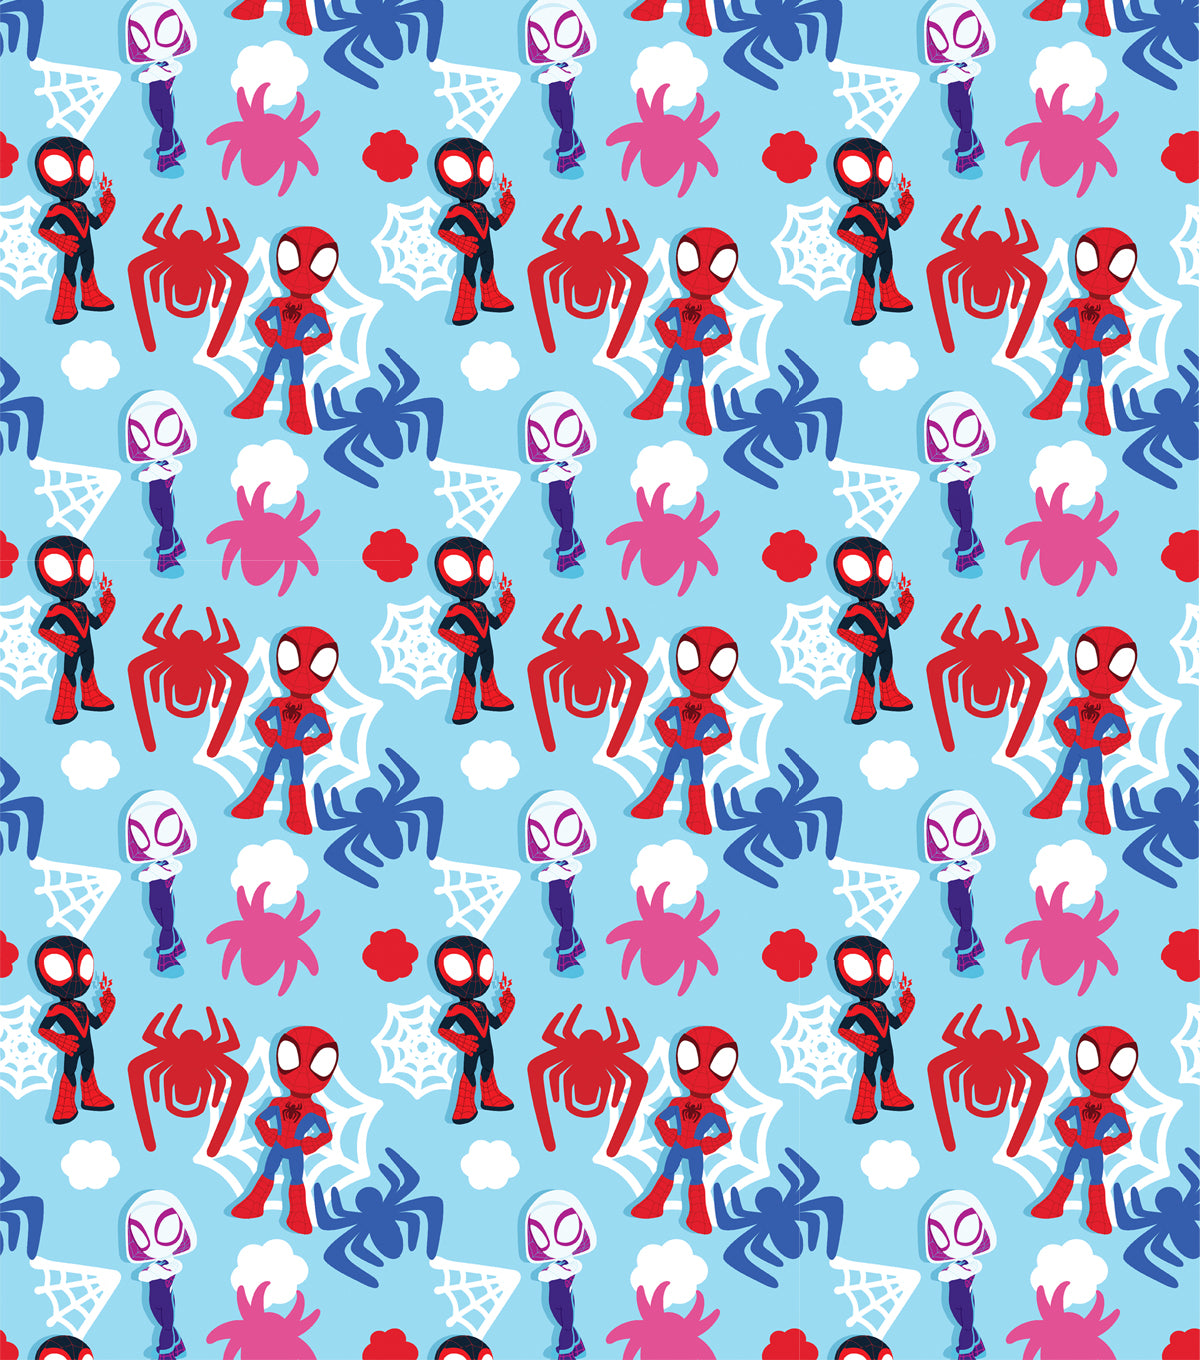 Marvel's Spidey and His Amazing Friends Spidey Fabric